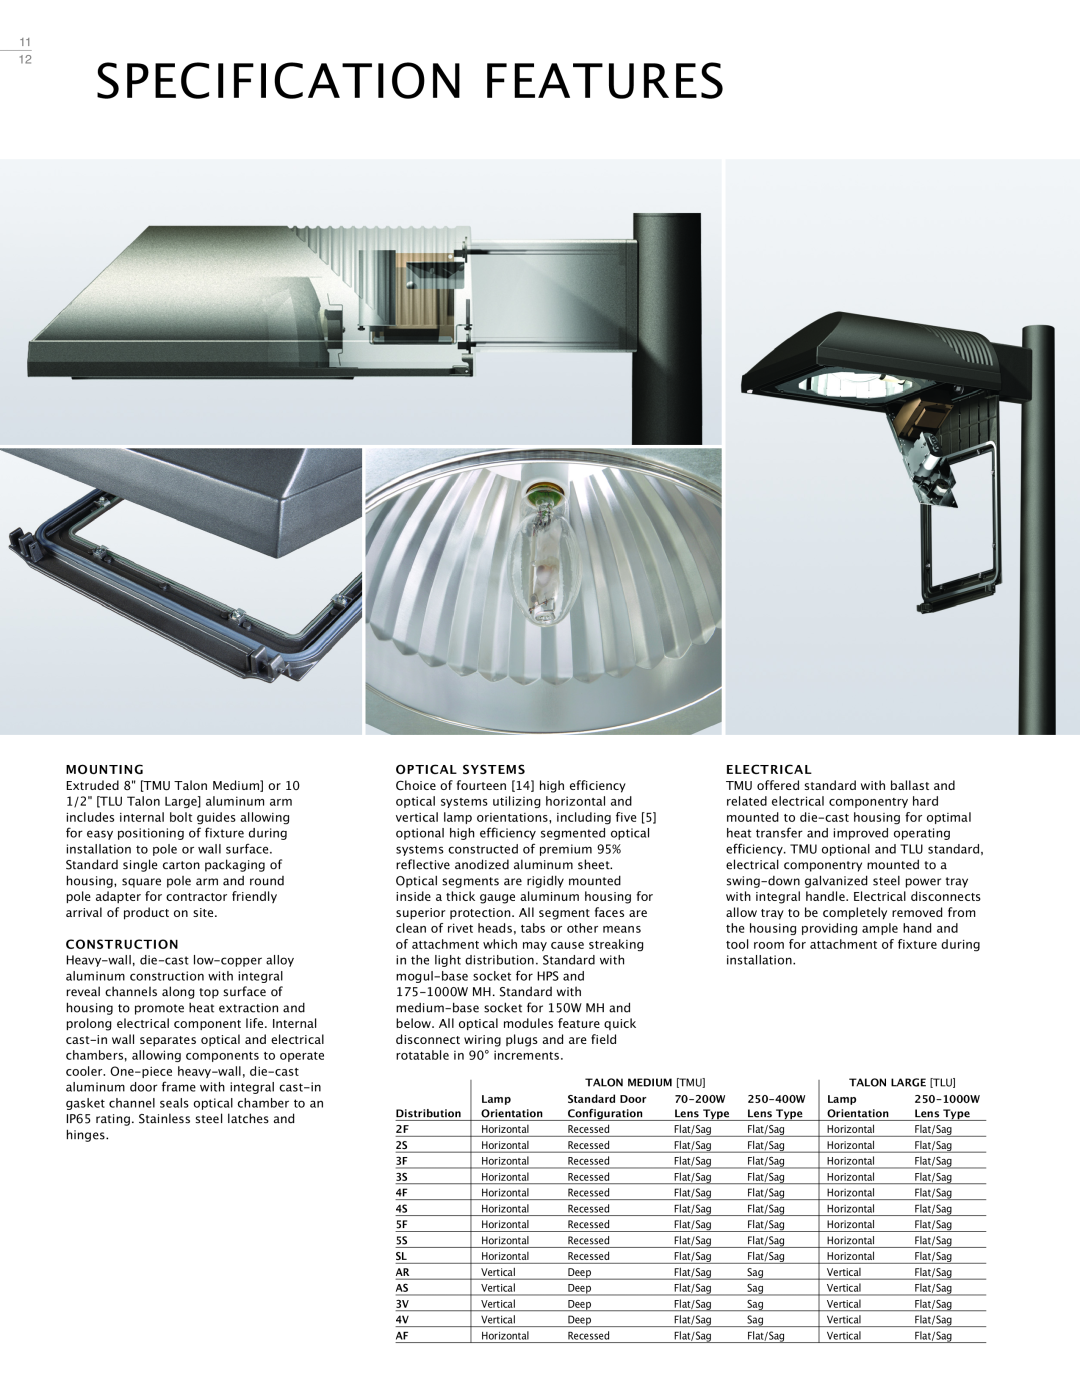 Cooper Lighting Area Luminaire manual Specification Features, 11 12, Mounting, Construction, Optical Systems, Electrical 